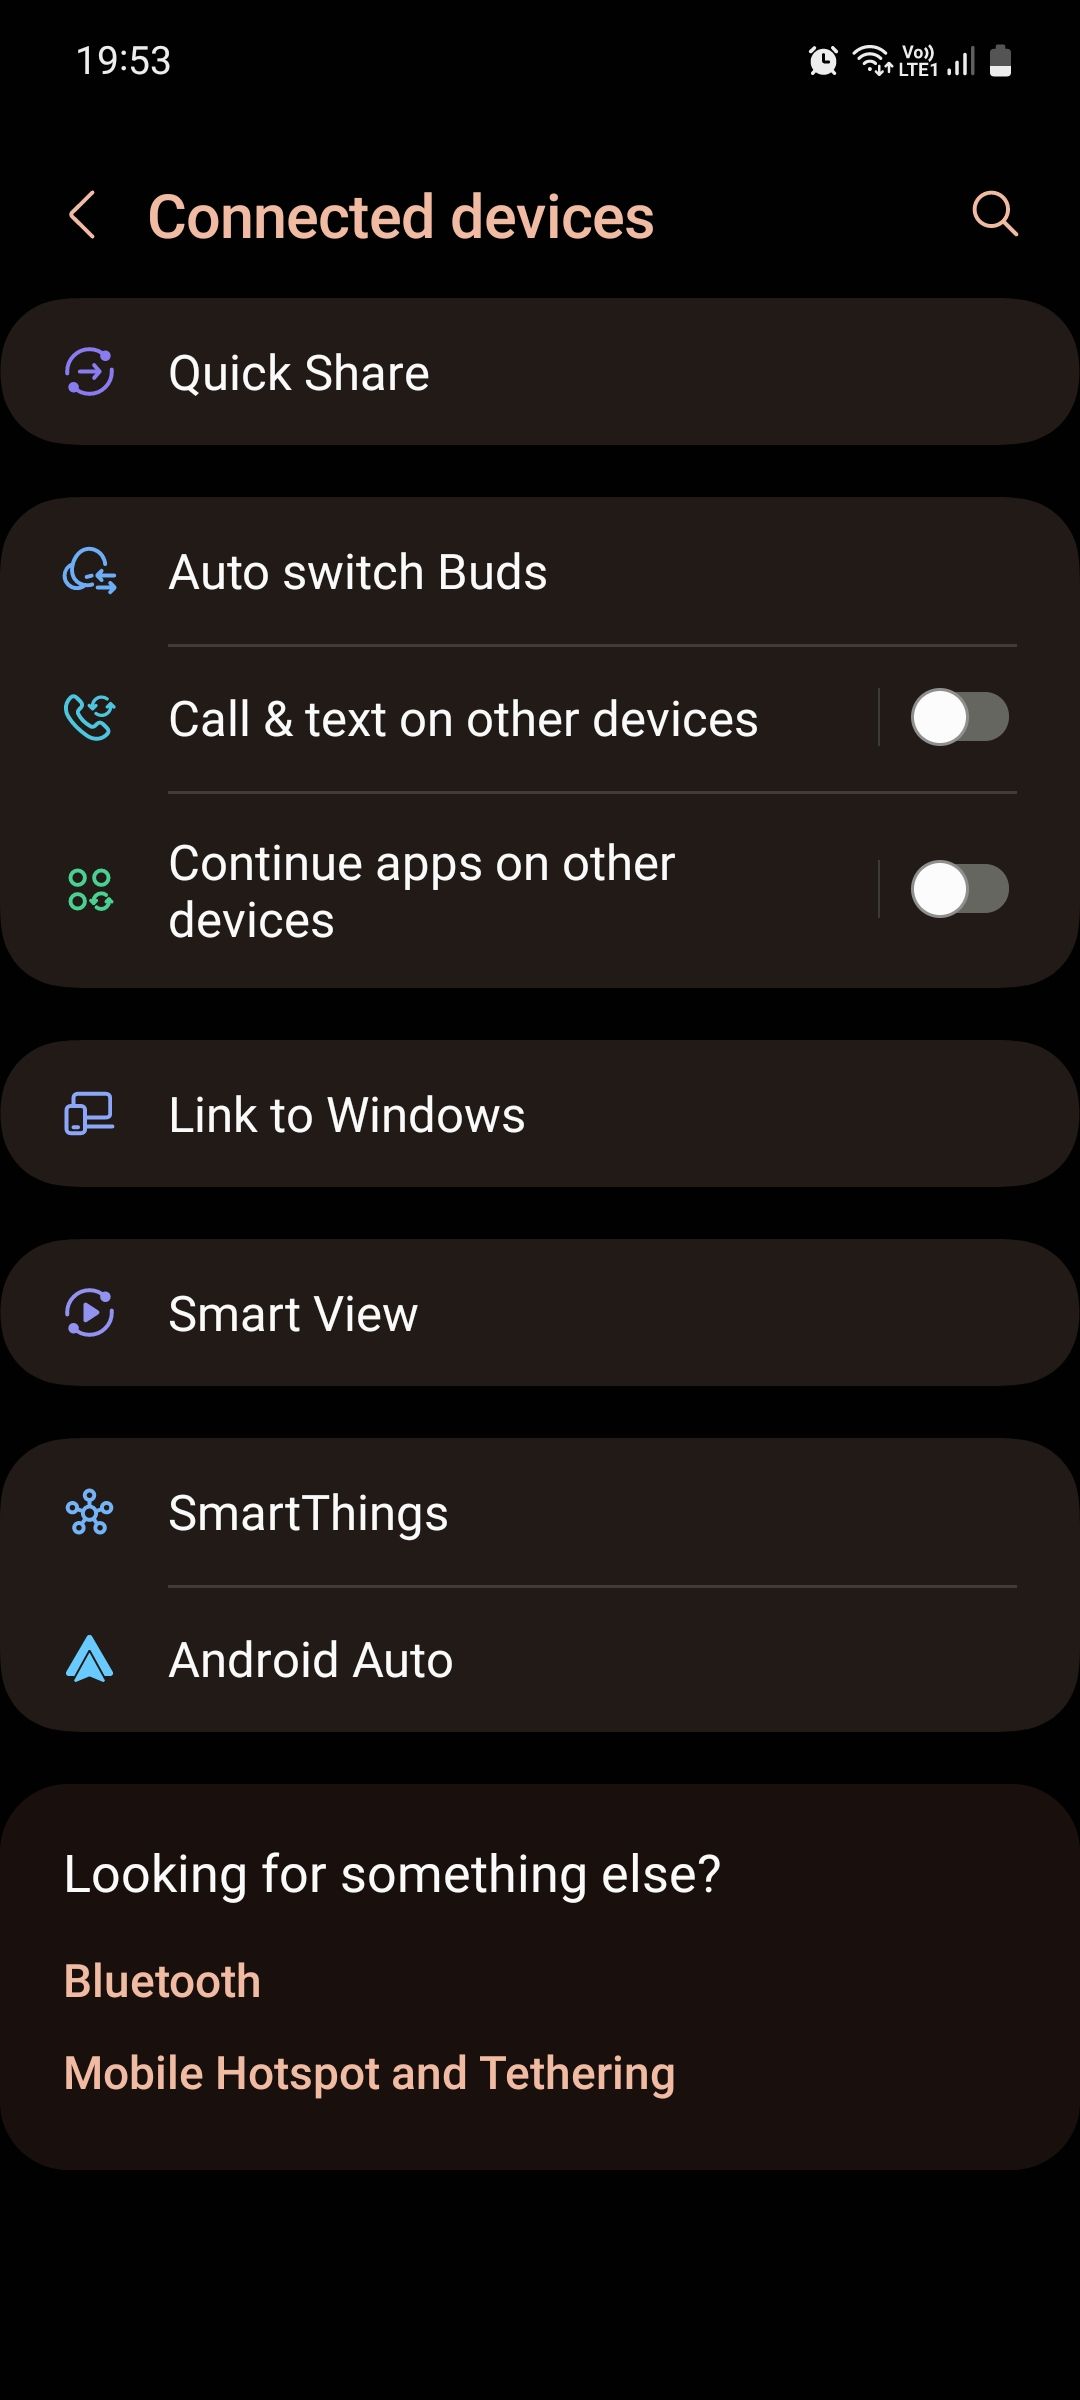 Samsung One UI 5 Connected devices menu